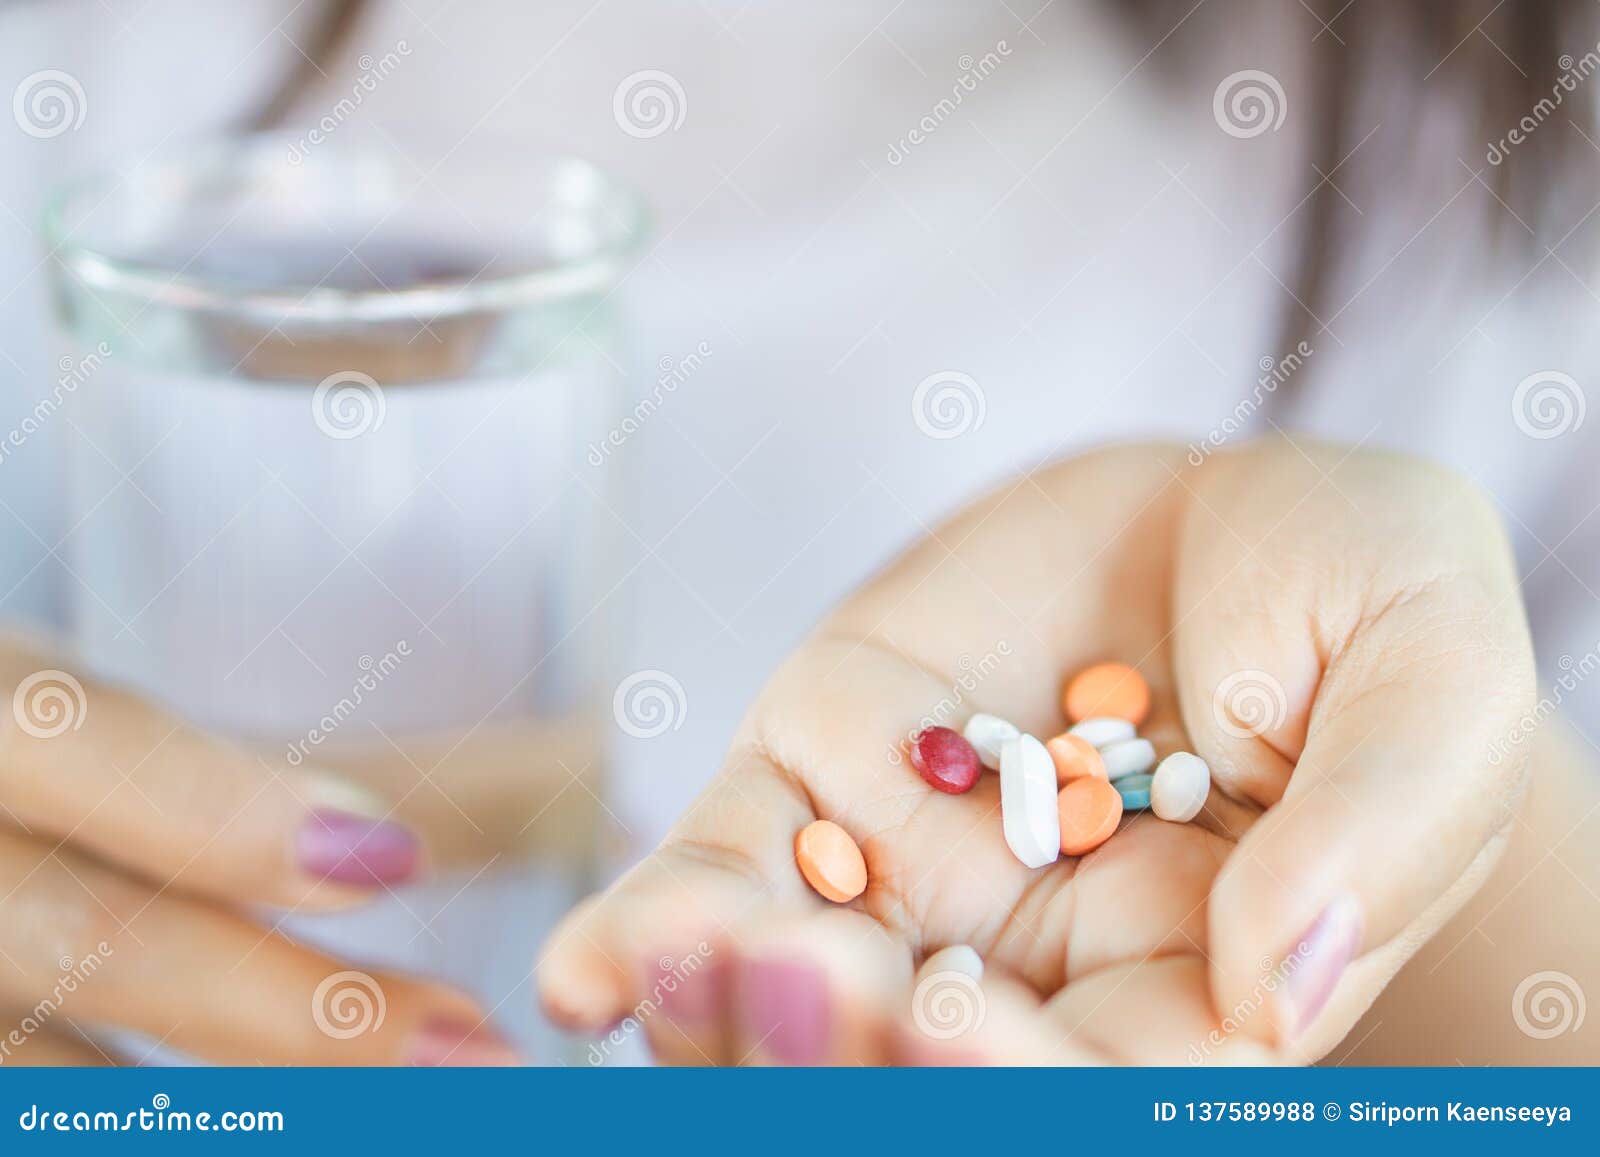 woman hand taking vitamins another hand holding glass of water